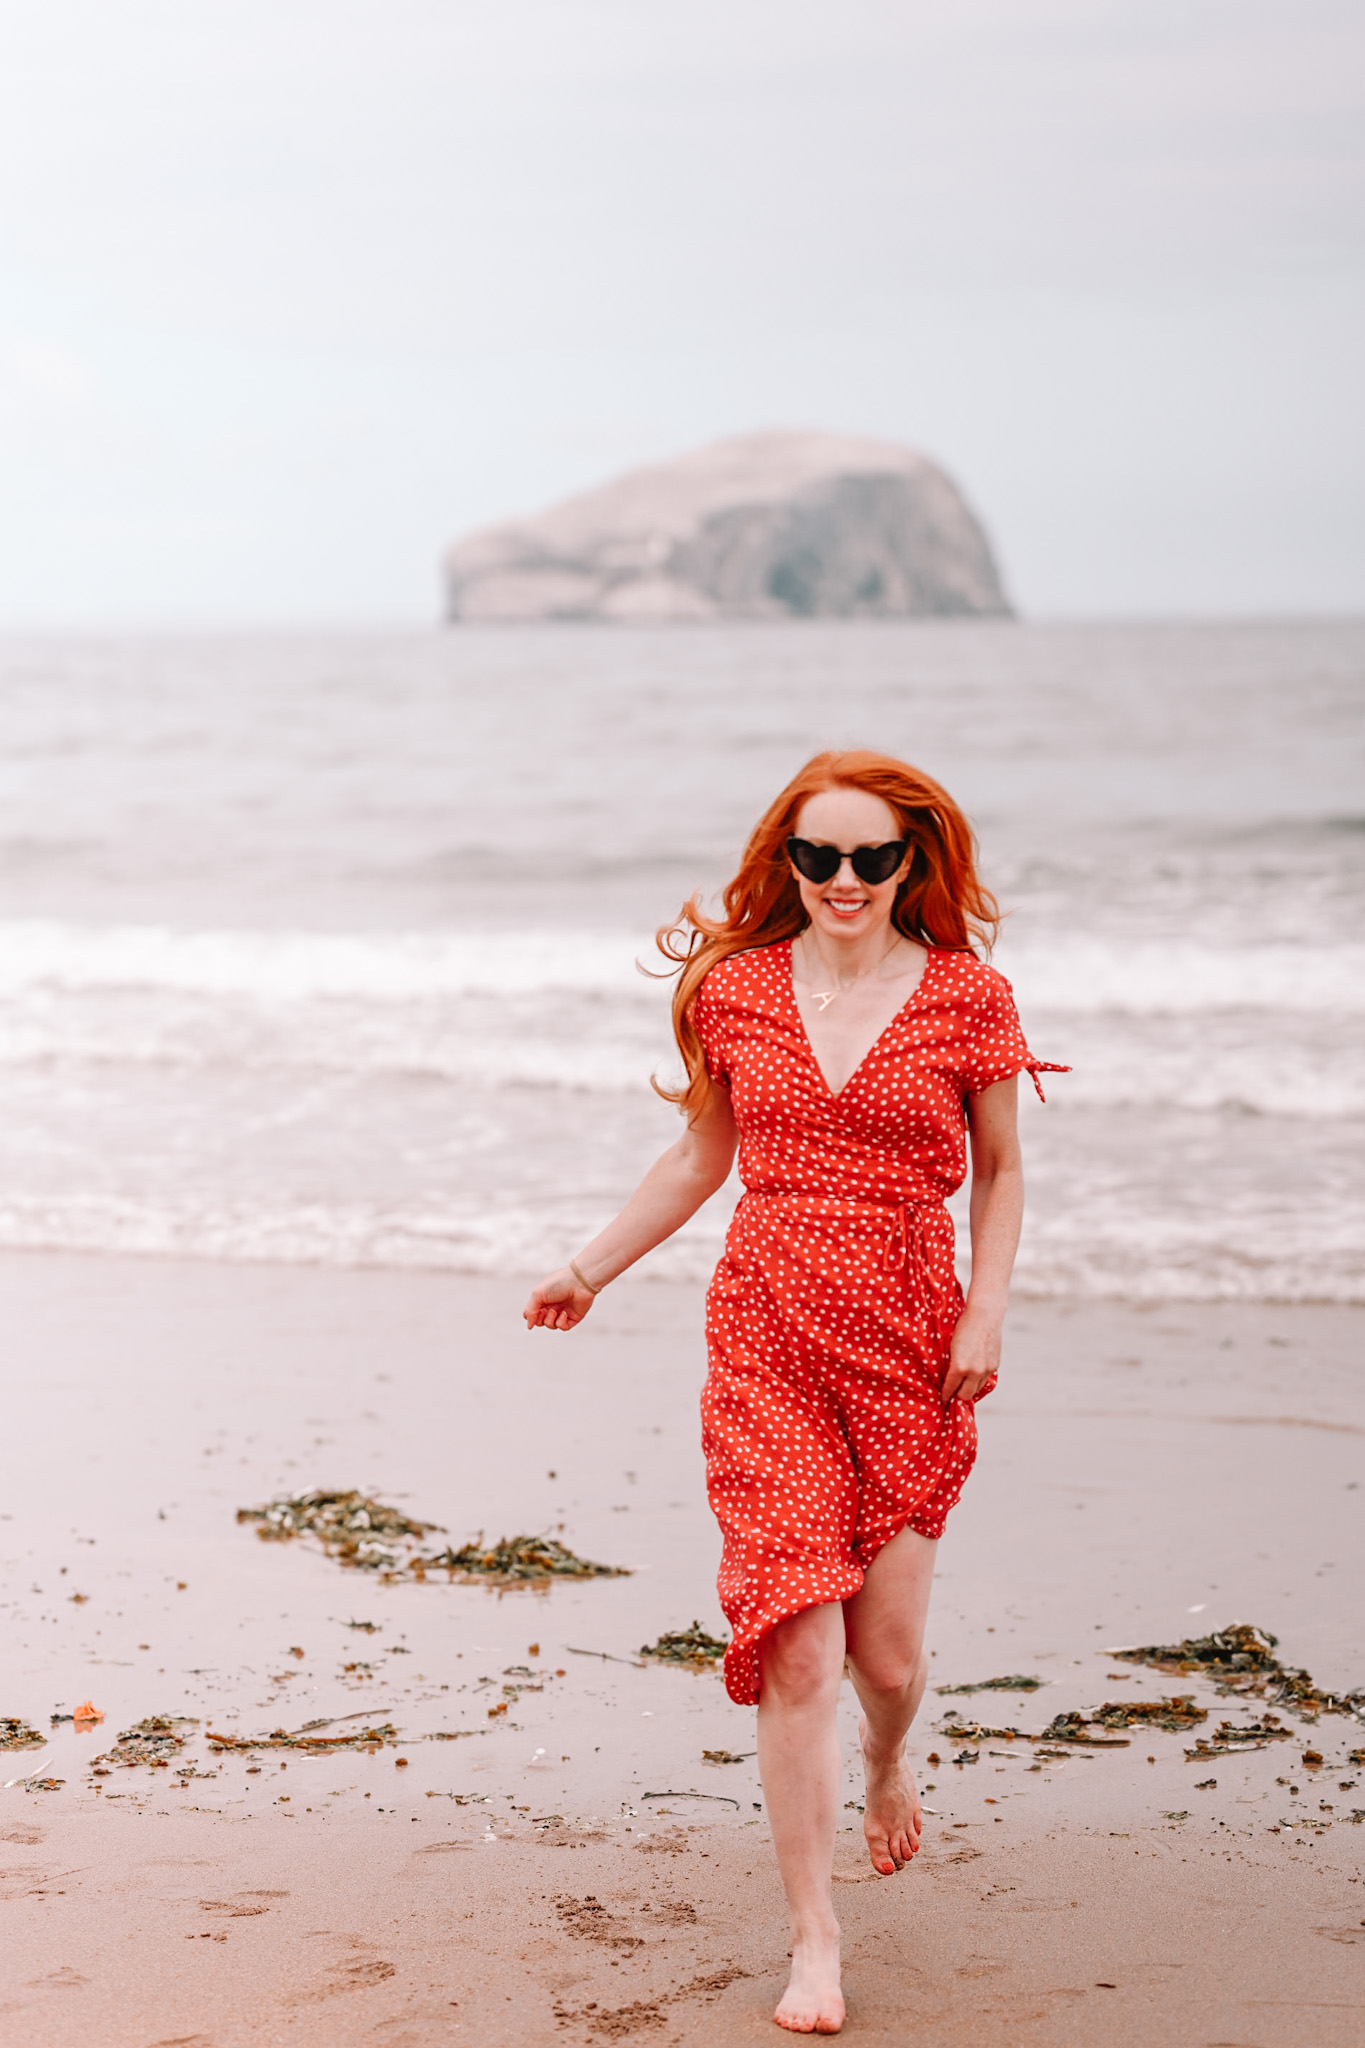 Amber in a red dress on the beach